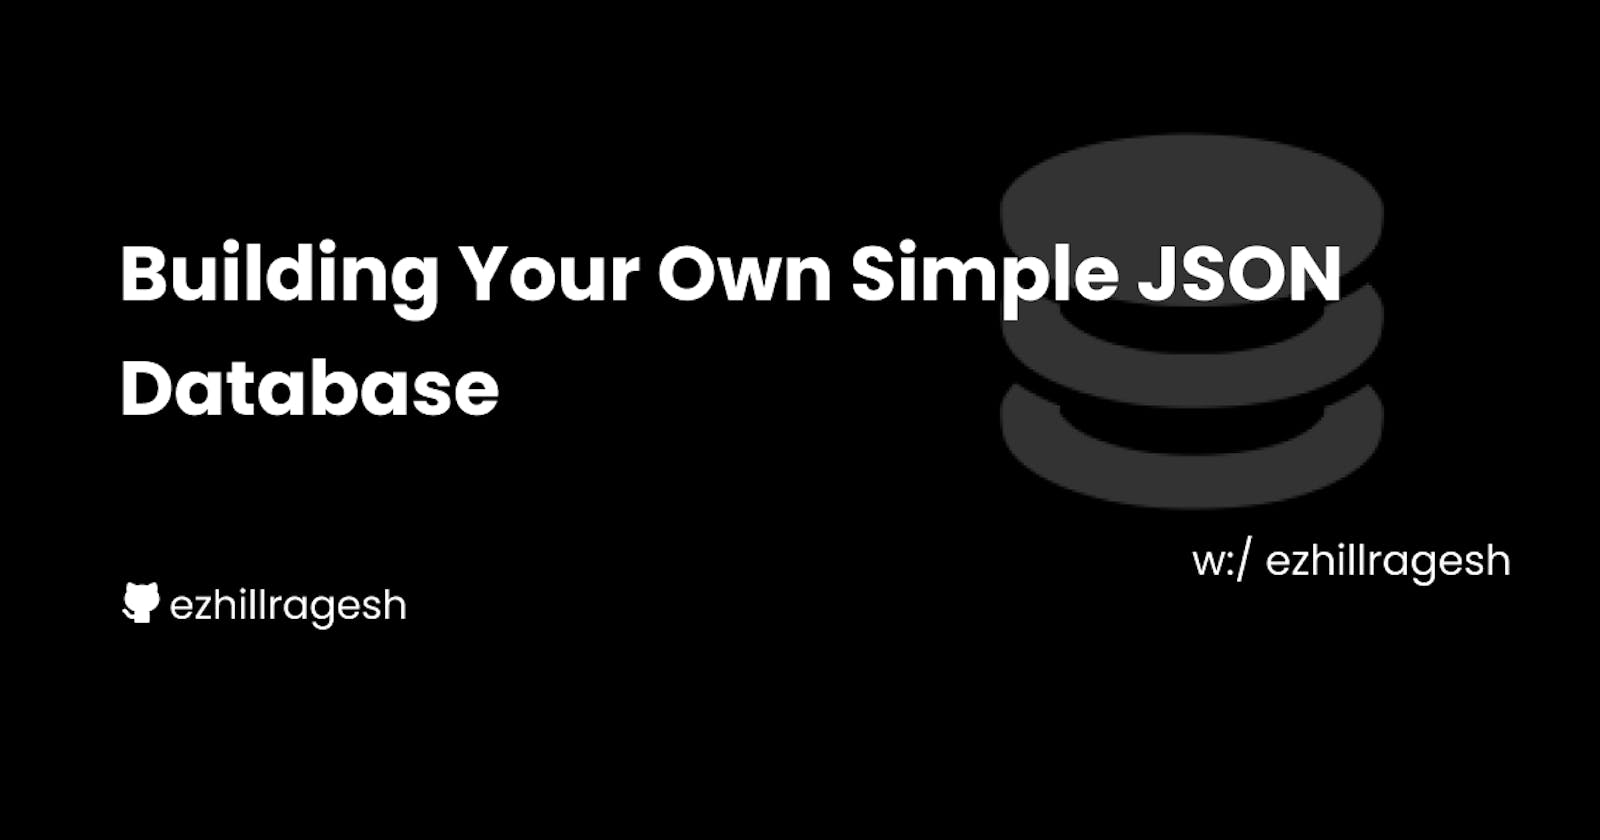 Building Your own Simple JSON Database